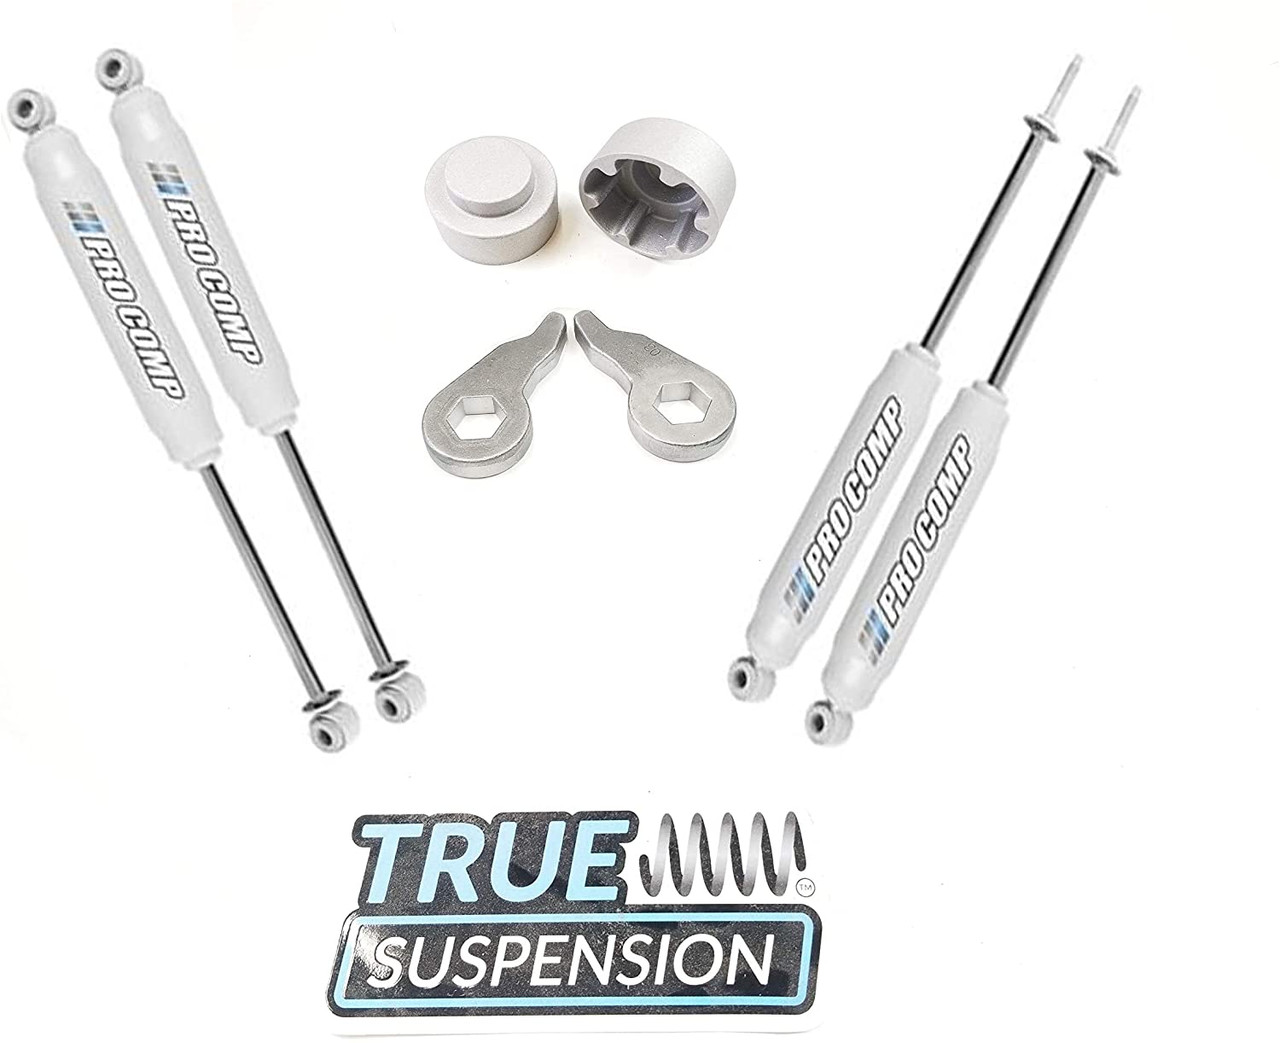 Compatible with Chevrolet GMC Suburban Avalanche Tahoe Yukon SUV 00-06 Lift kit Front Adjustable 1-3" Torsion Keys + 2" Lift Steel Spacers + Set of ProComp Es9000 Nitrogen Charged Shocks Kit 4wd